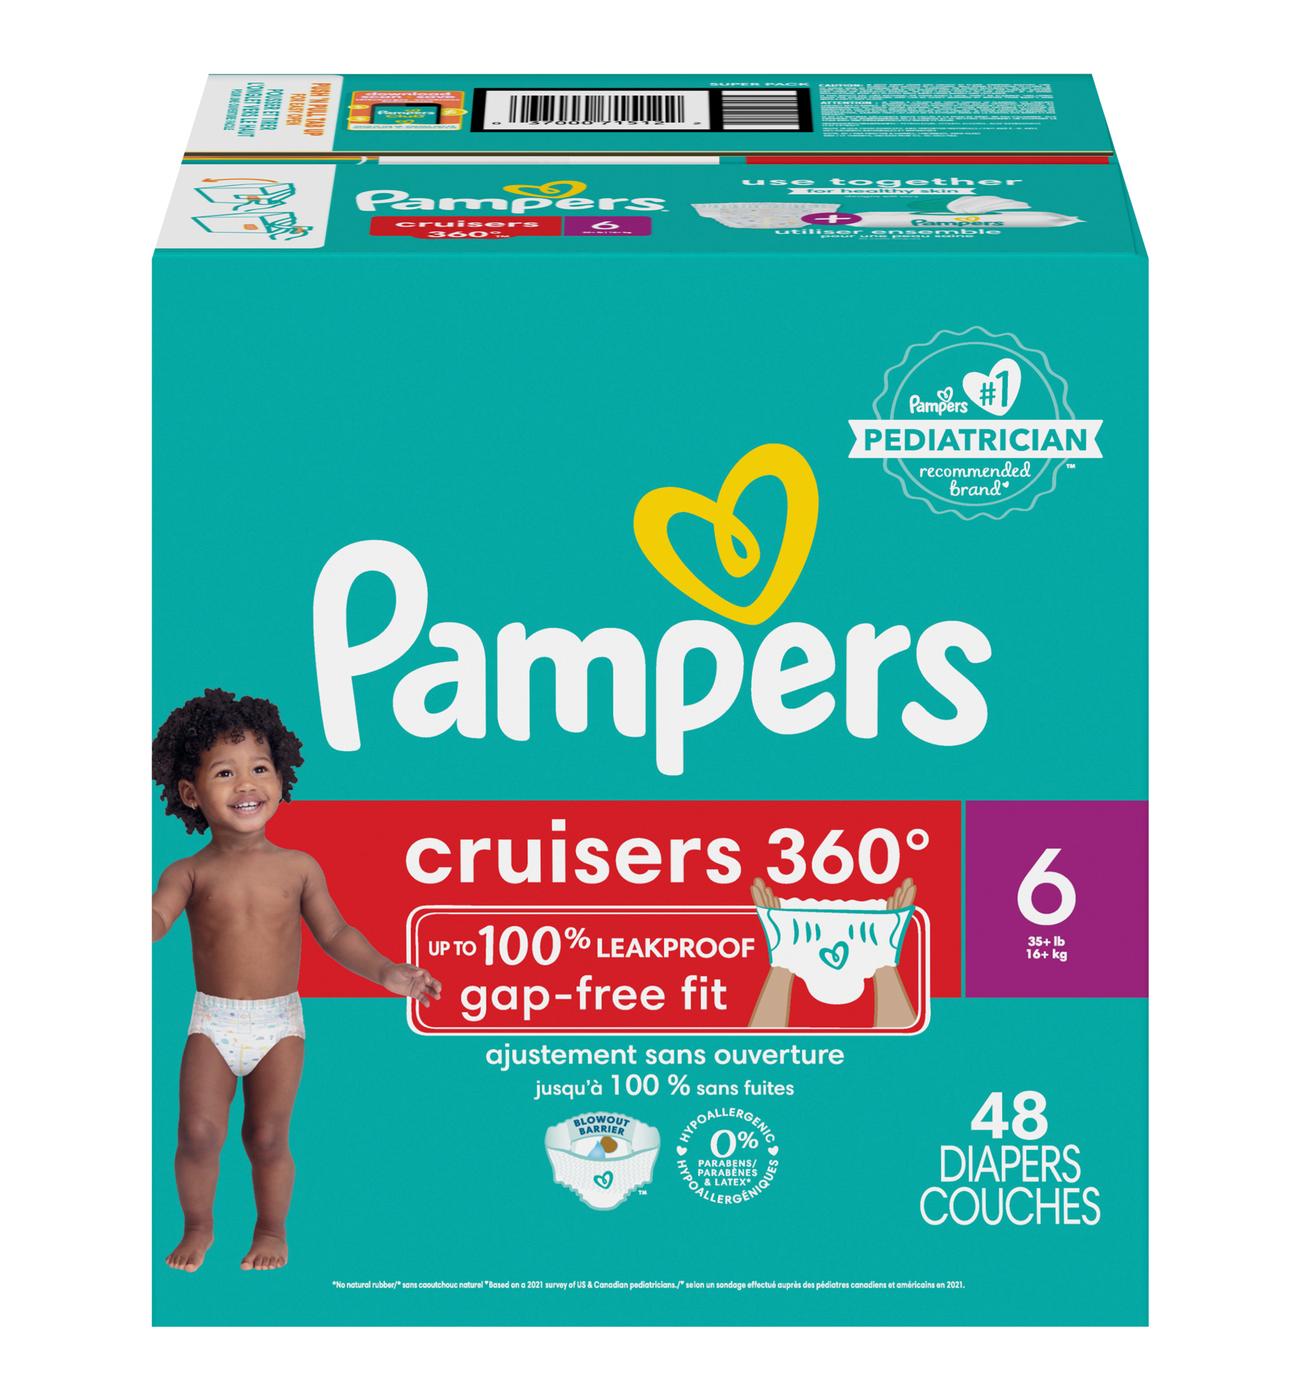 Pampers Cruisers 360 Diapers - Size 6; image 1 of 9